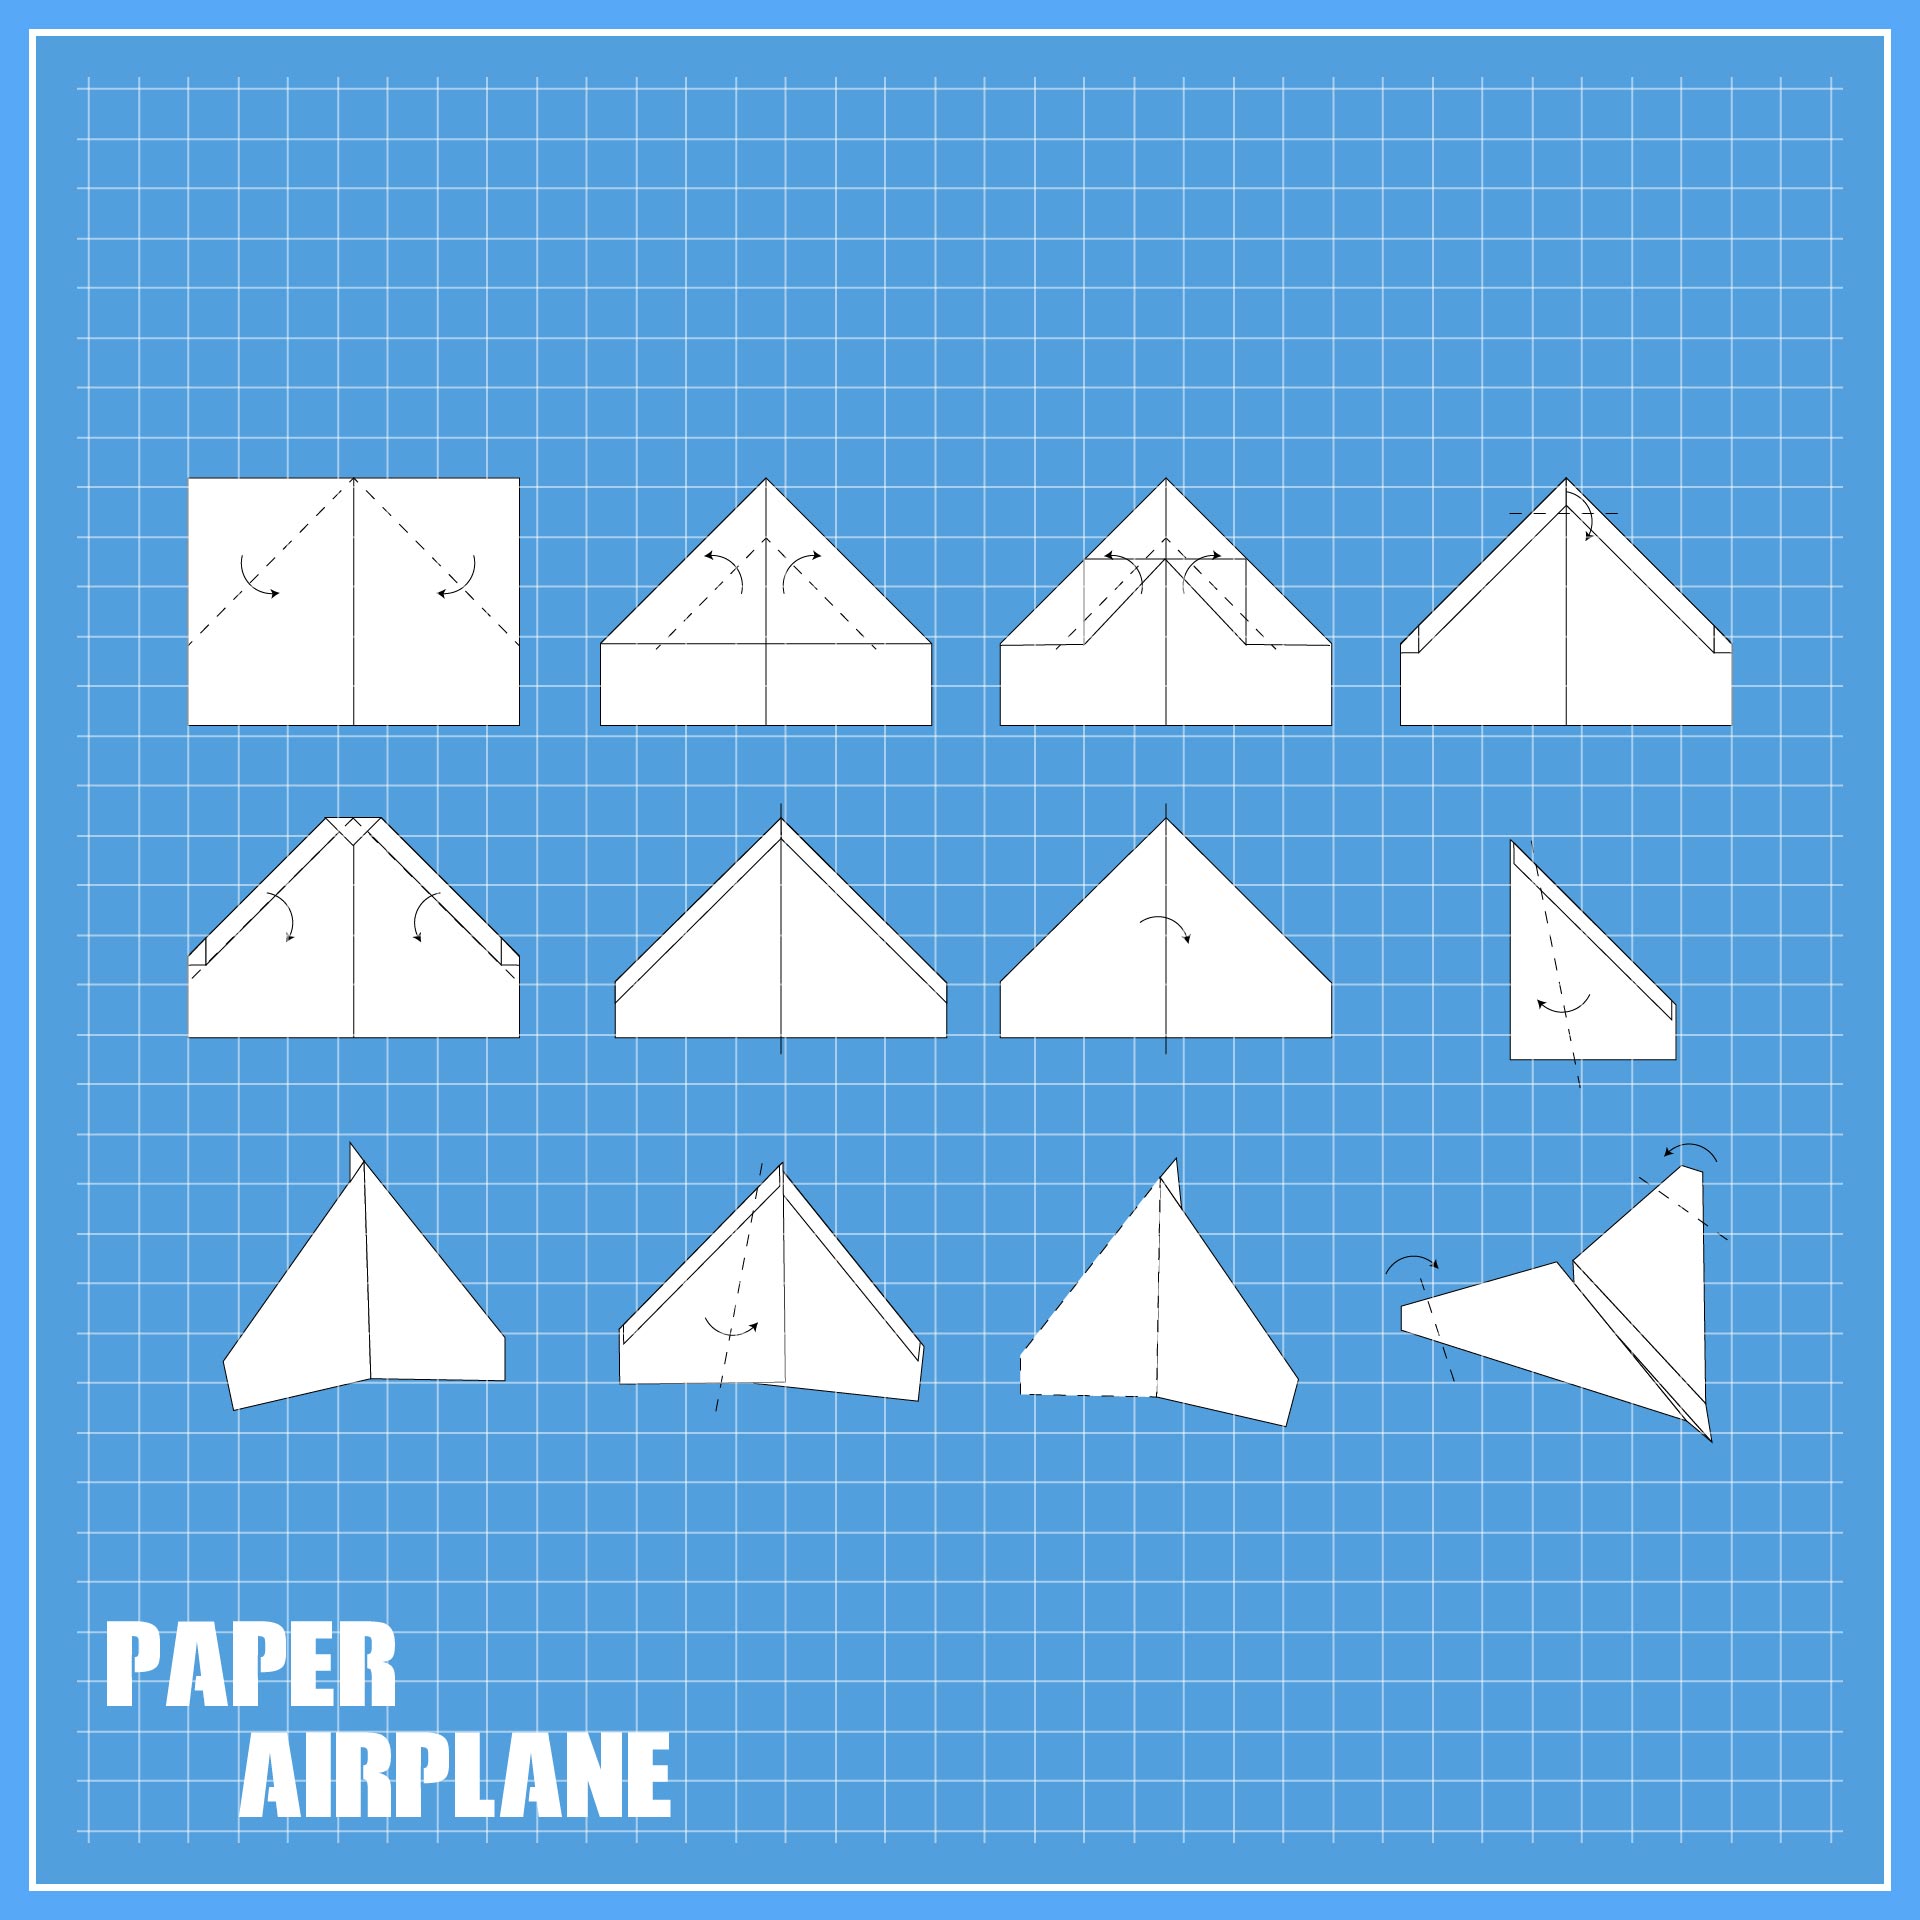 6 Best Images of Printable Paper Airplane Templates Printable Paper